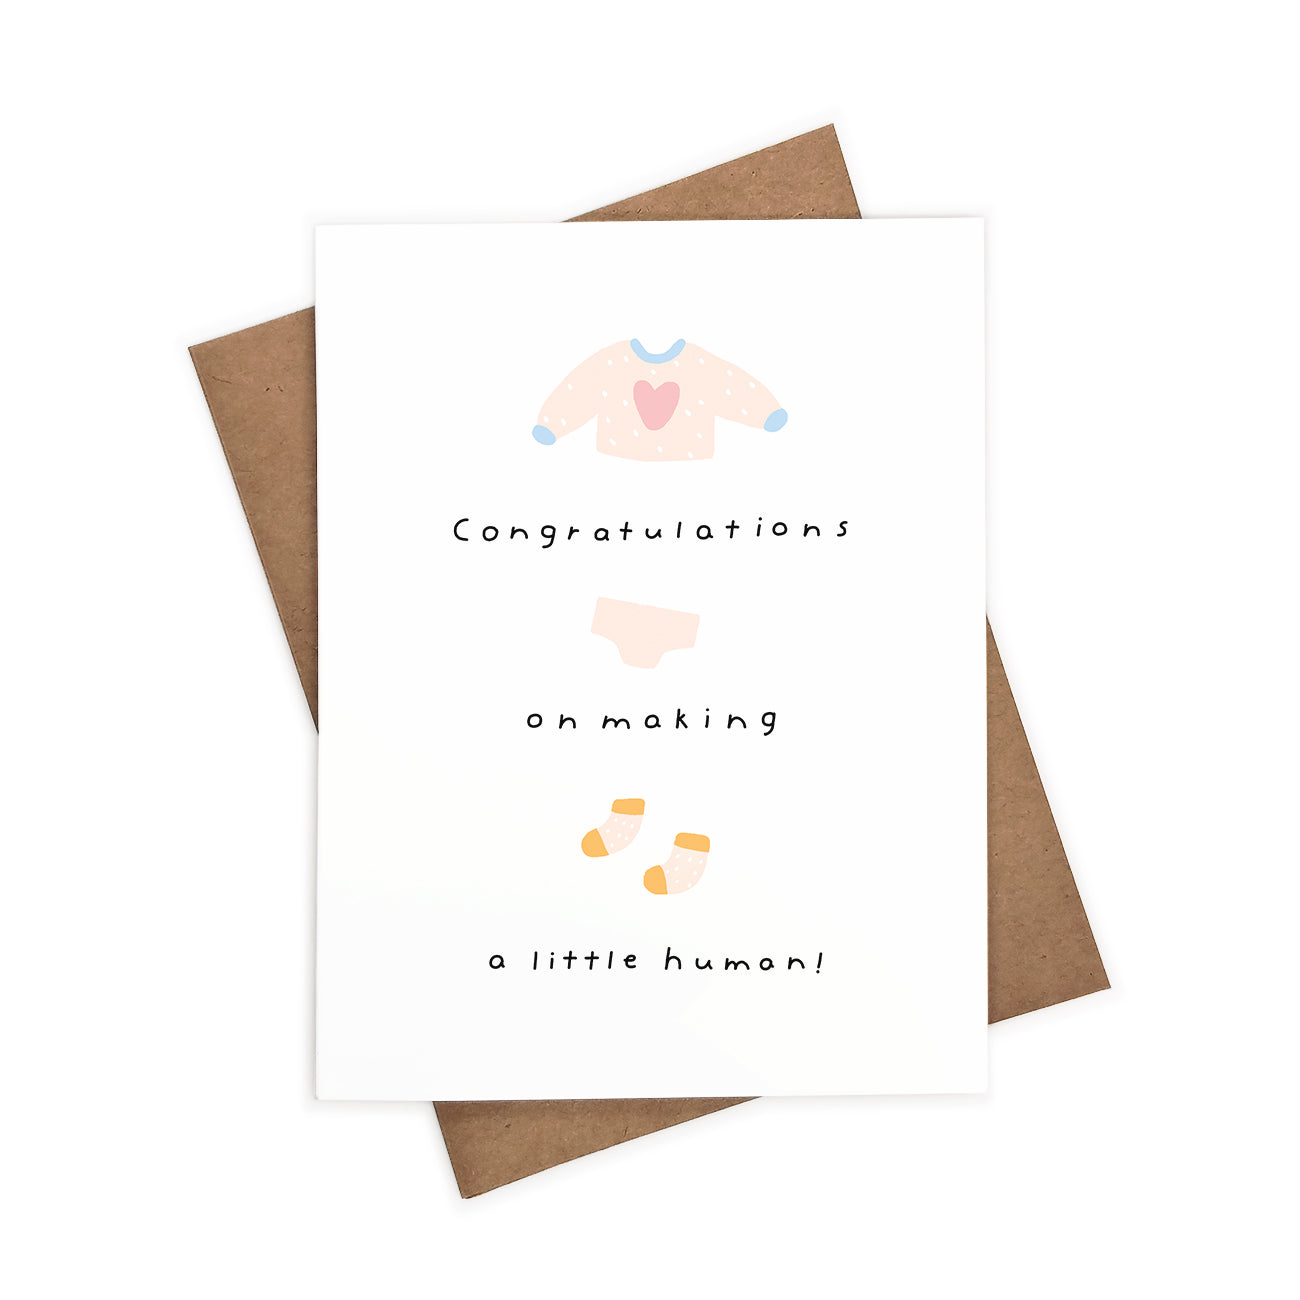 Little Human, Congratulations | Eco-Friendly Greeting Card